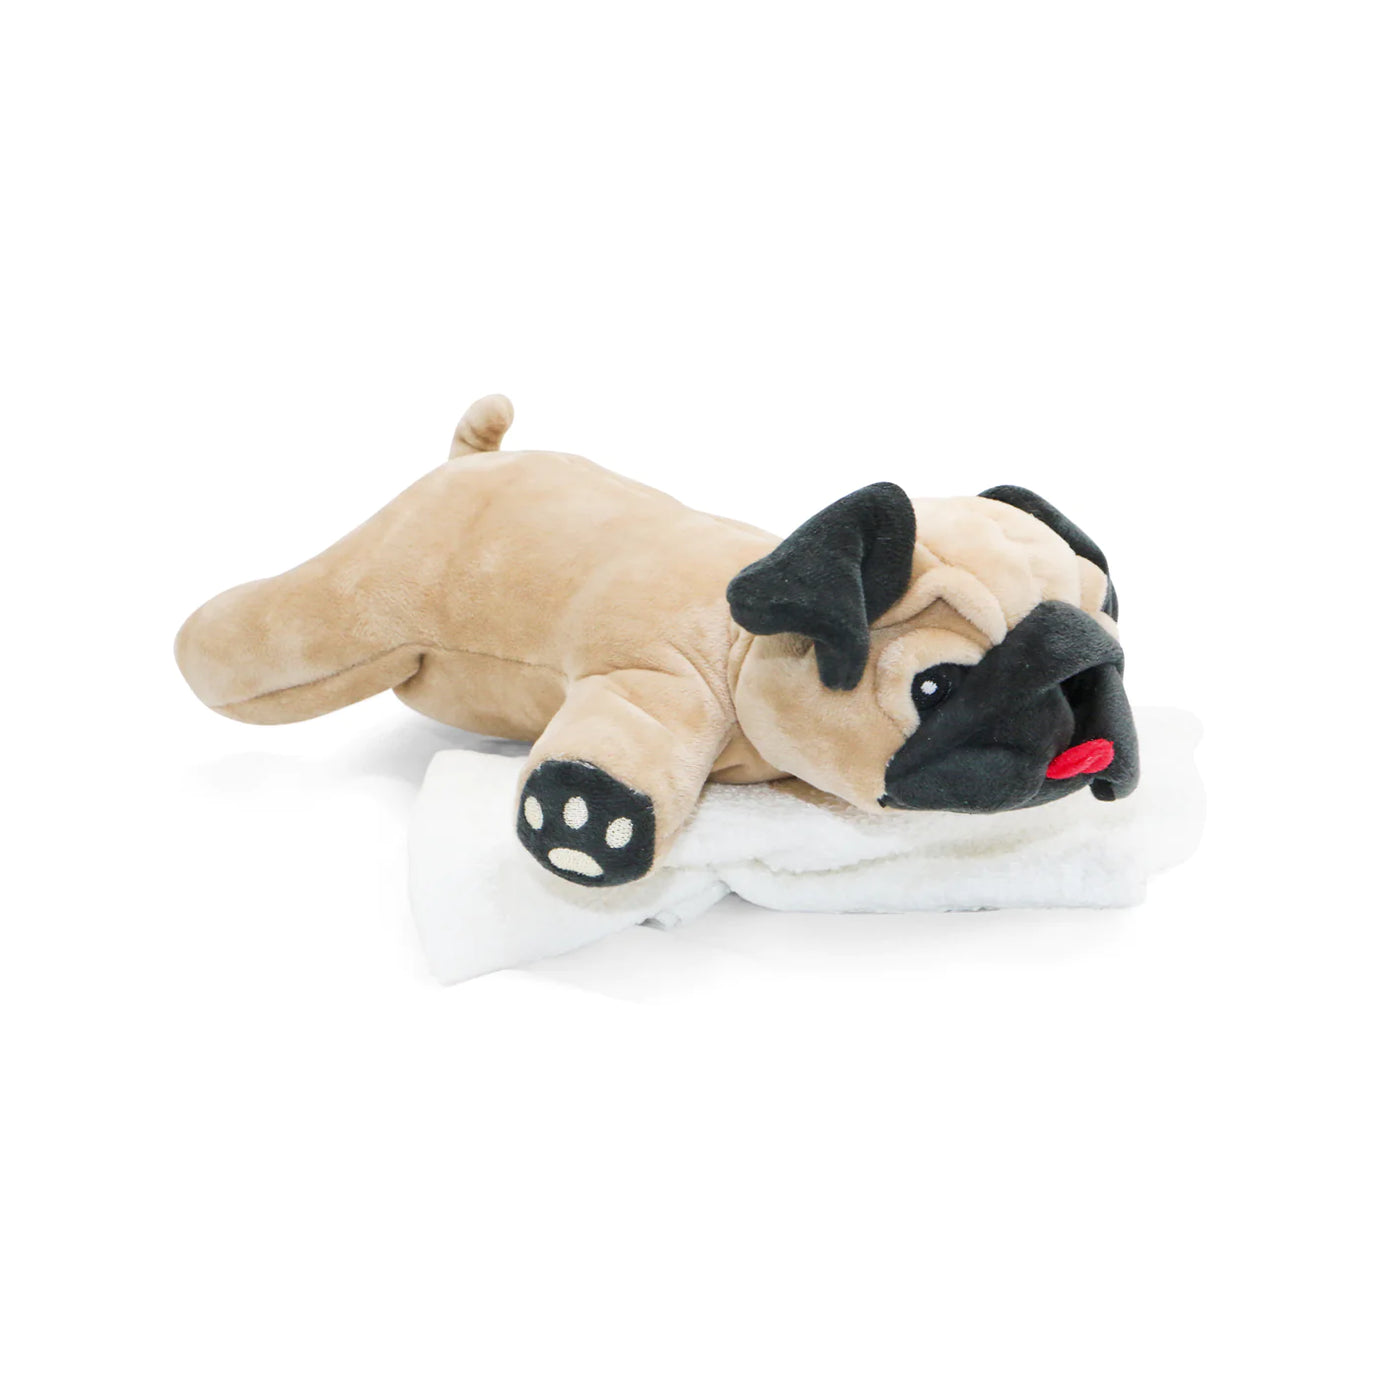 Cuddle up with Cuteness: 10 Pug Stuffed Animals That'll Melt Your Heart